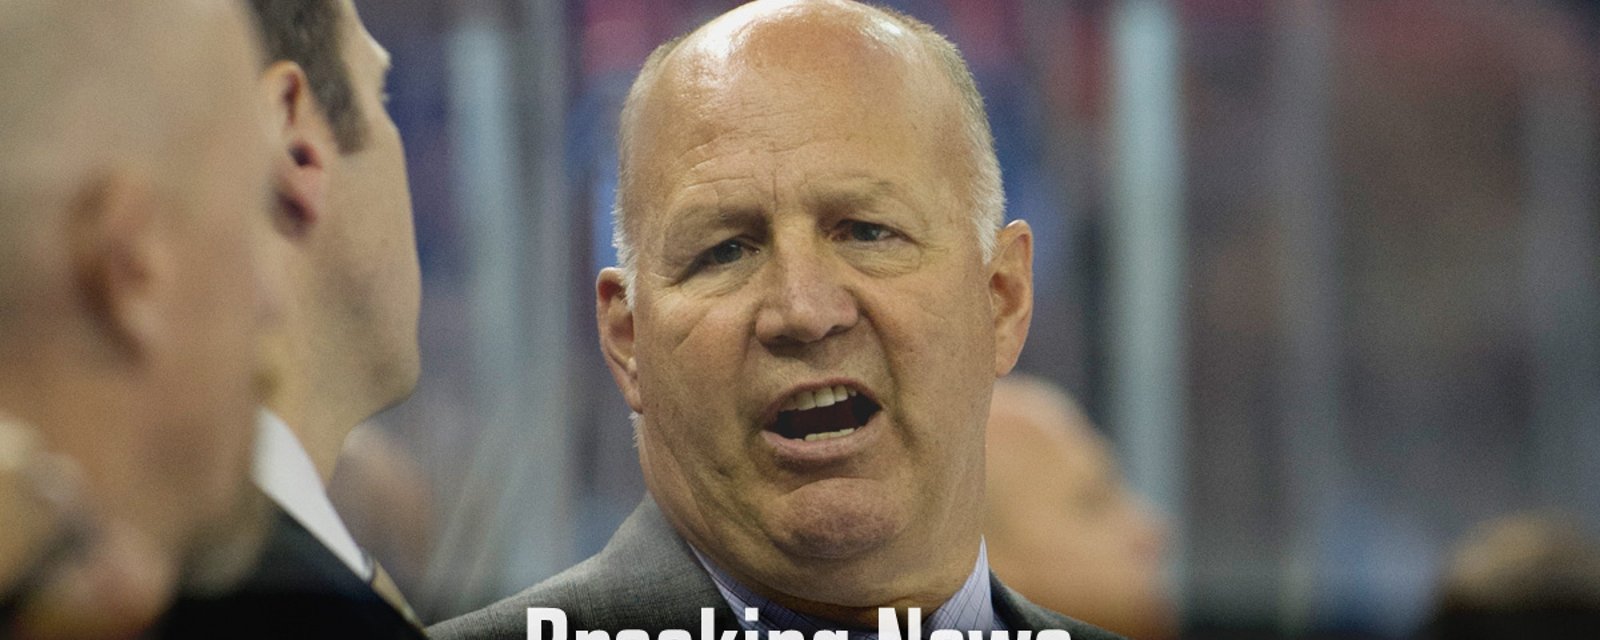 Breaking News : Already some phone calls inquiring for Claude Julien!